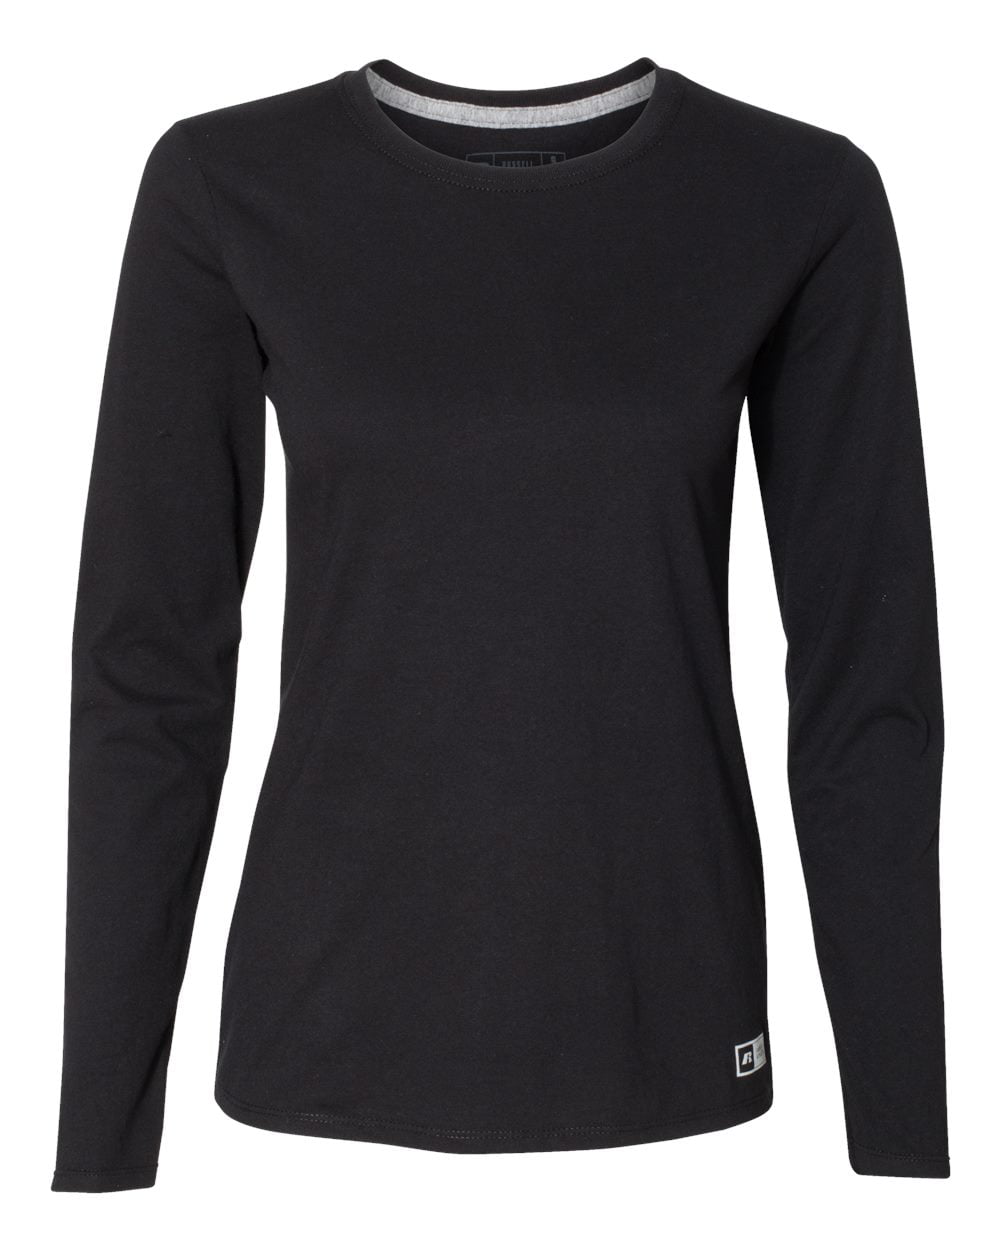 Russell Athletic - Russell Athletic - NIB - Female - Women's Essential ...